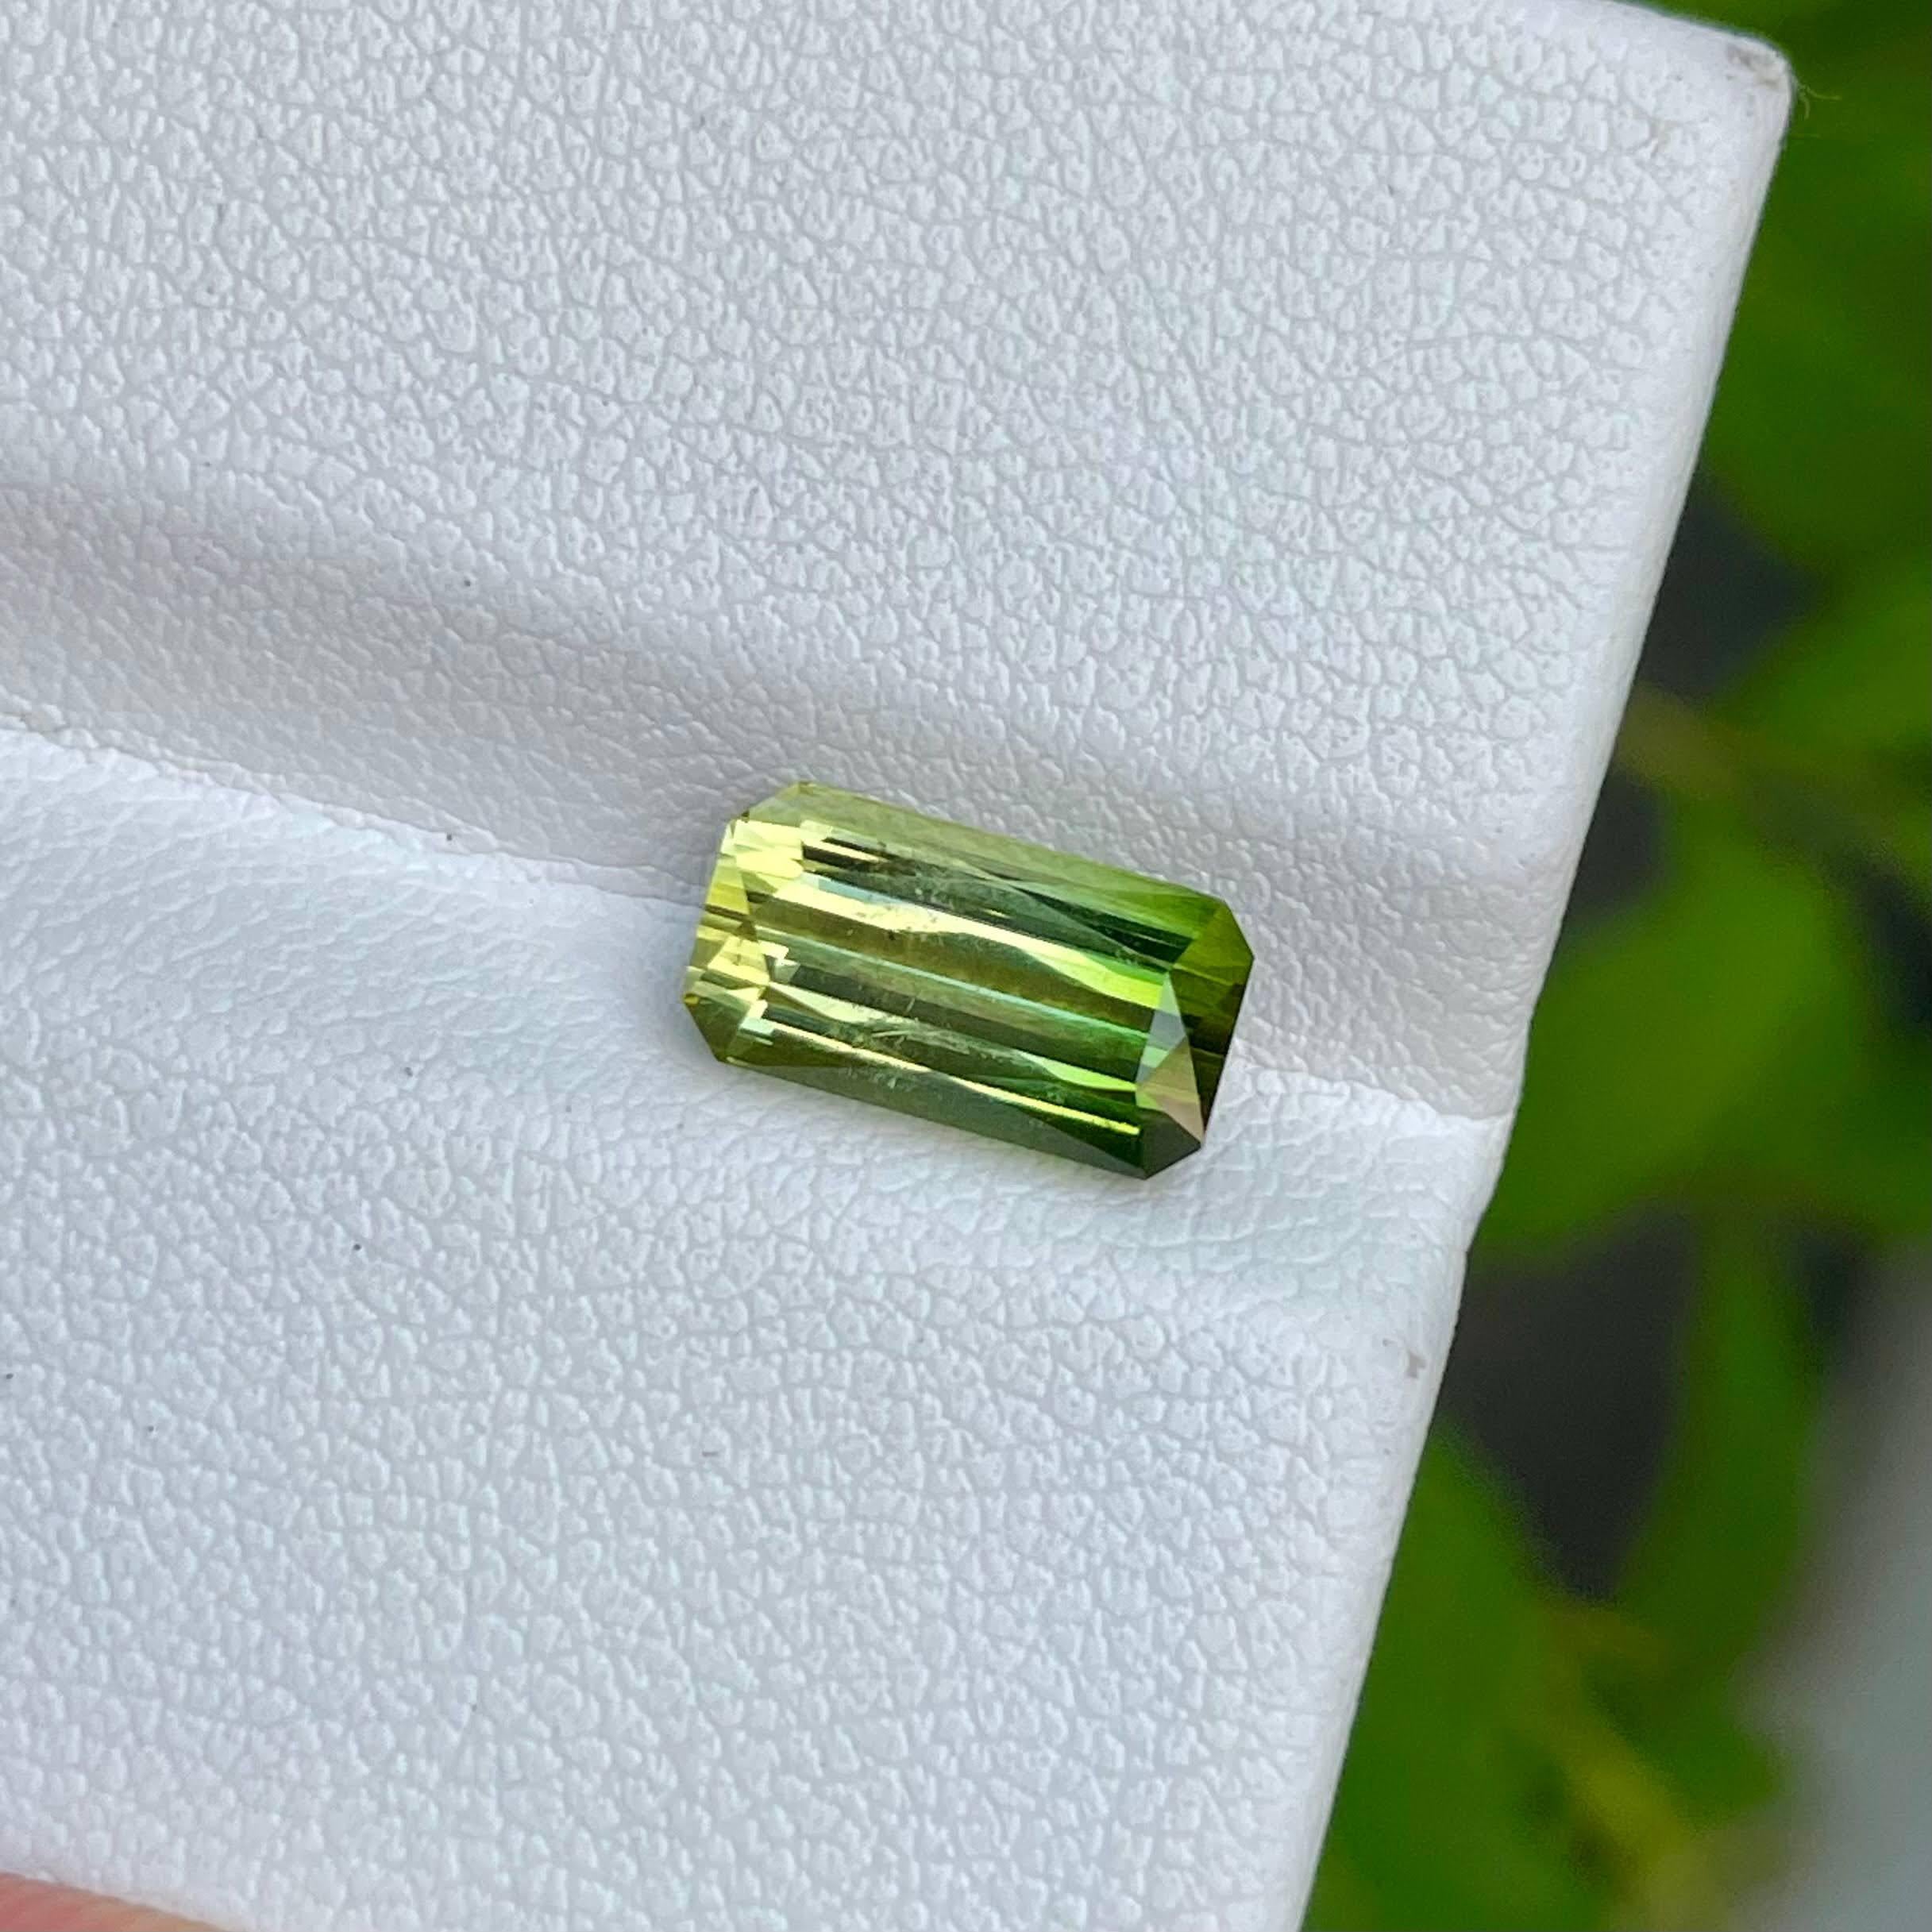 Weight 2.60 carats 
Dimensions 10.0x5.4x5.11 mm
Treatment none 
Origin Africa
Clarity VVS 
Shape octagon 
Cut emerald 




The exquisite Bi-Color Tourmaline stone, boasting a weight of 2.60 carats, captivates with its stunning Emerald Cut,